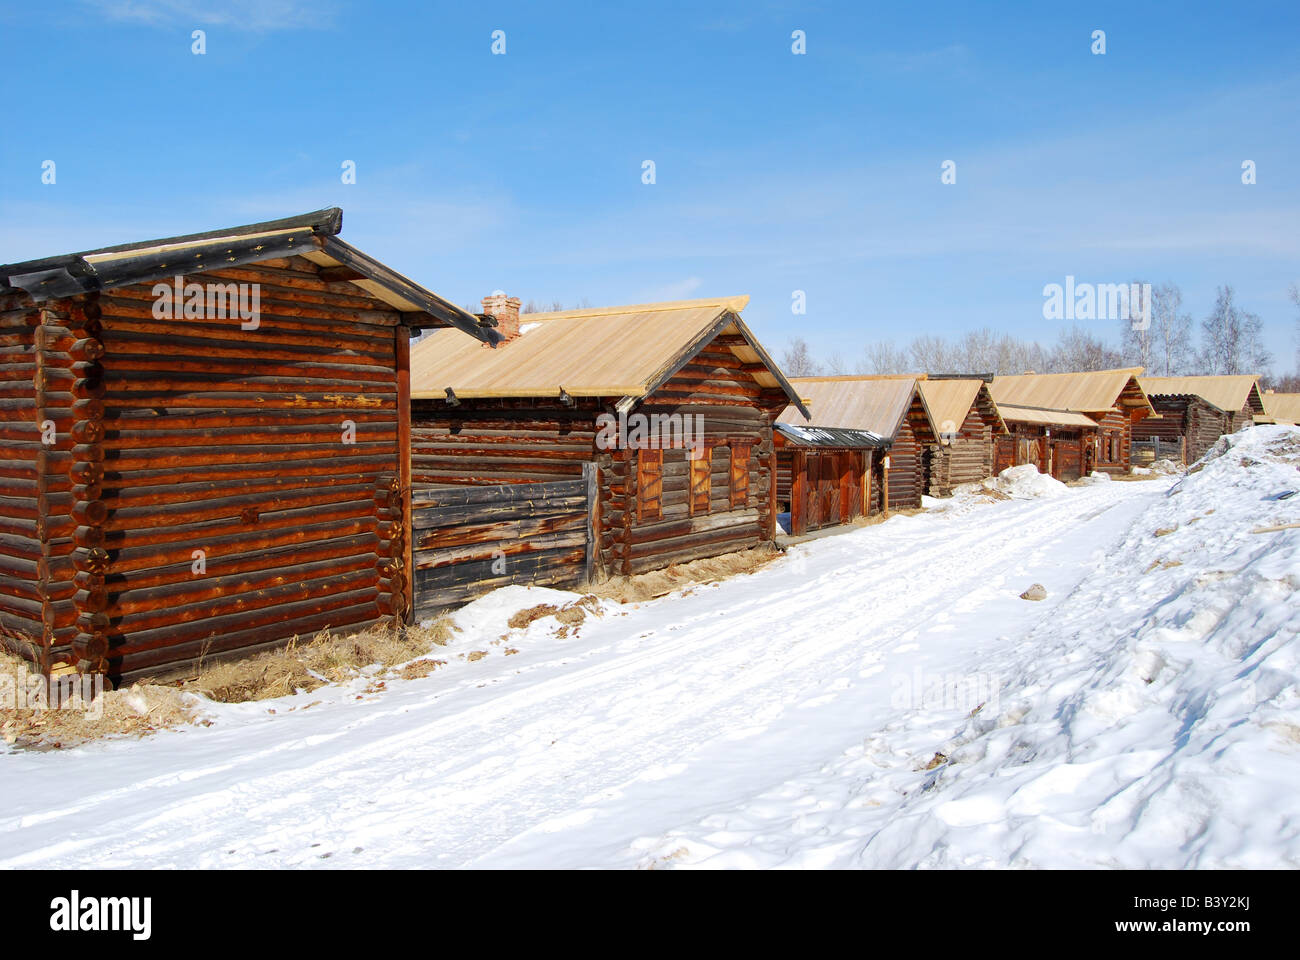 Traditional wooden Siberian buildings at the Taltsy Museum of Wooden Arcitecture and Ethnography near Lake Baikal Russia Stock Photo